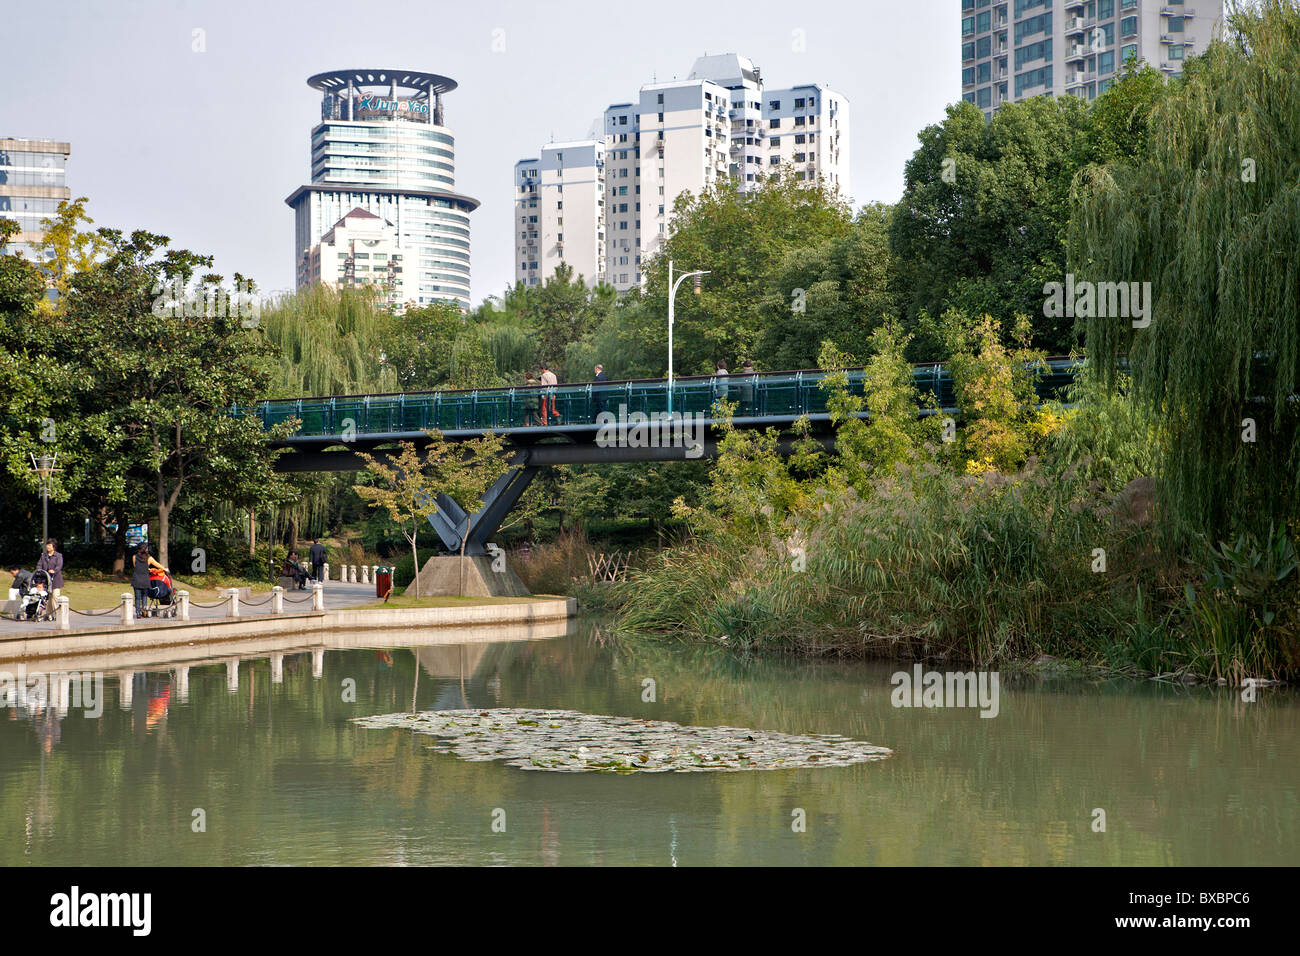 Lake with bridge and buildings in background, Xujiahui Park, Shanghai, China Stock Photo